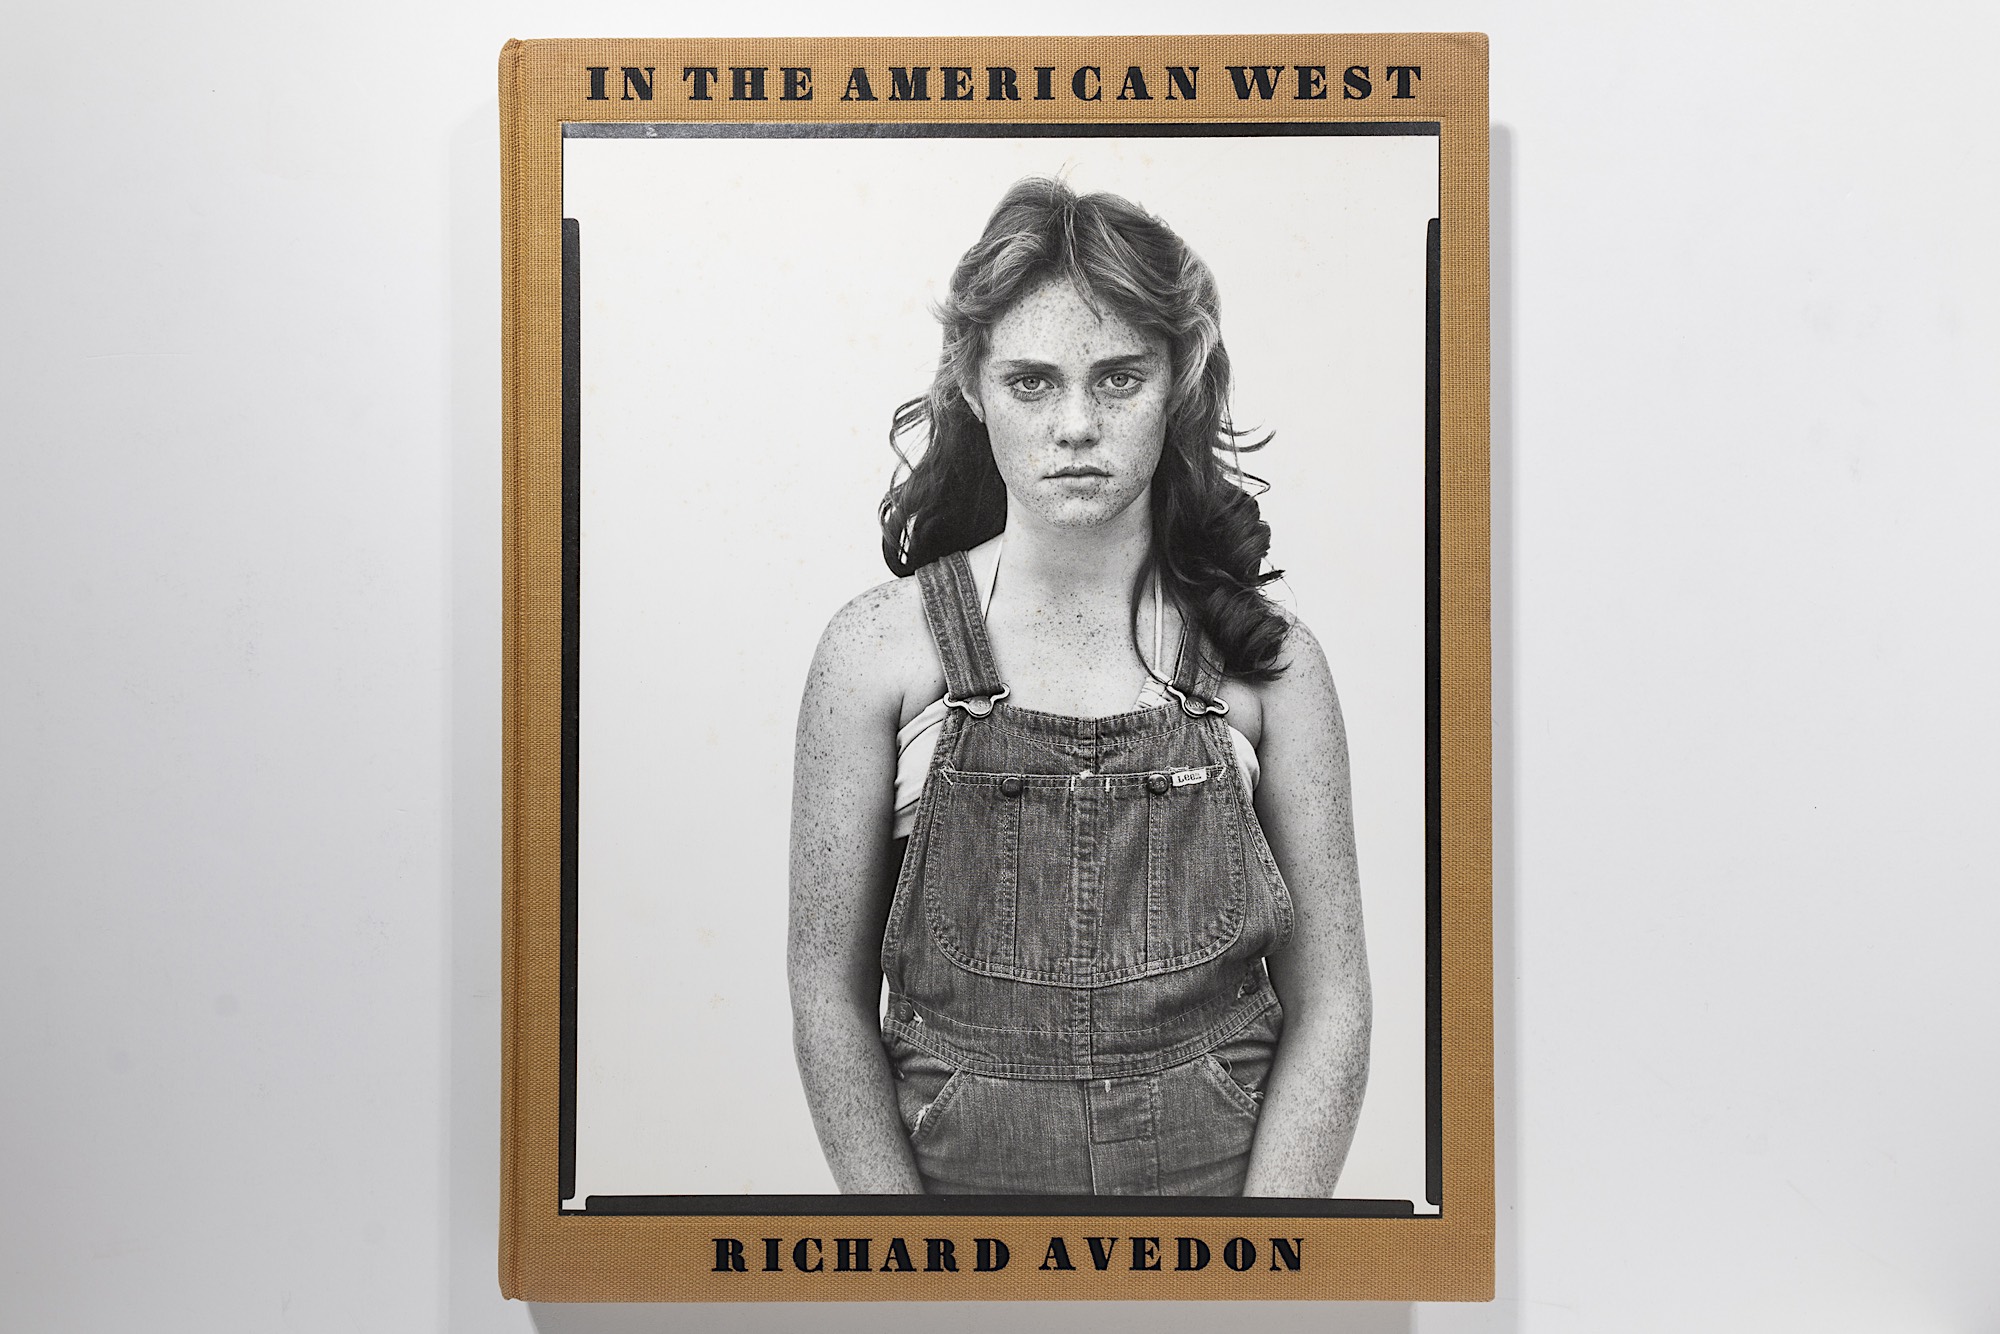 Richard Avedon - In the American West Image 3